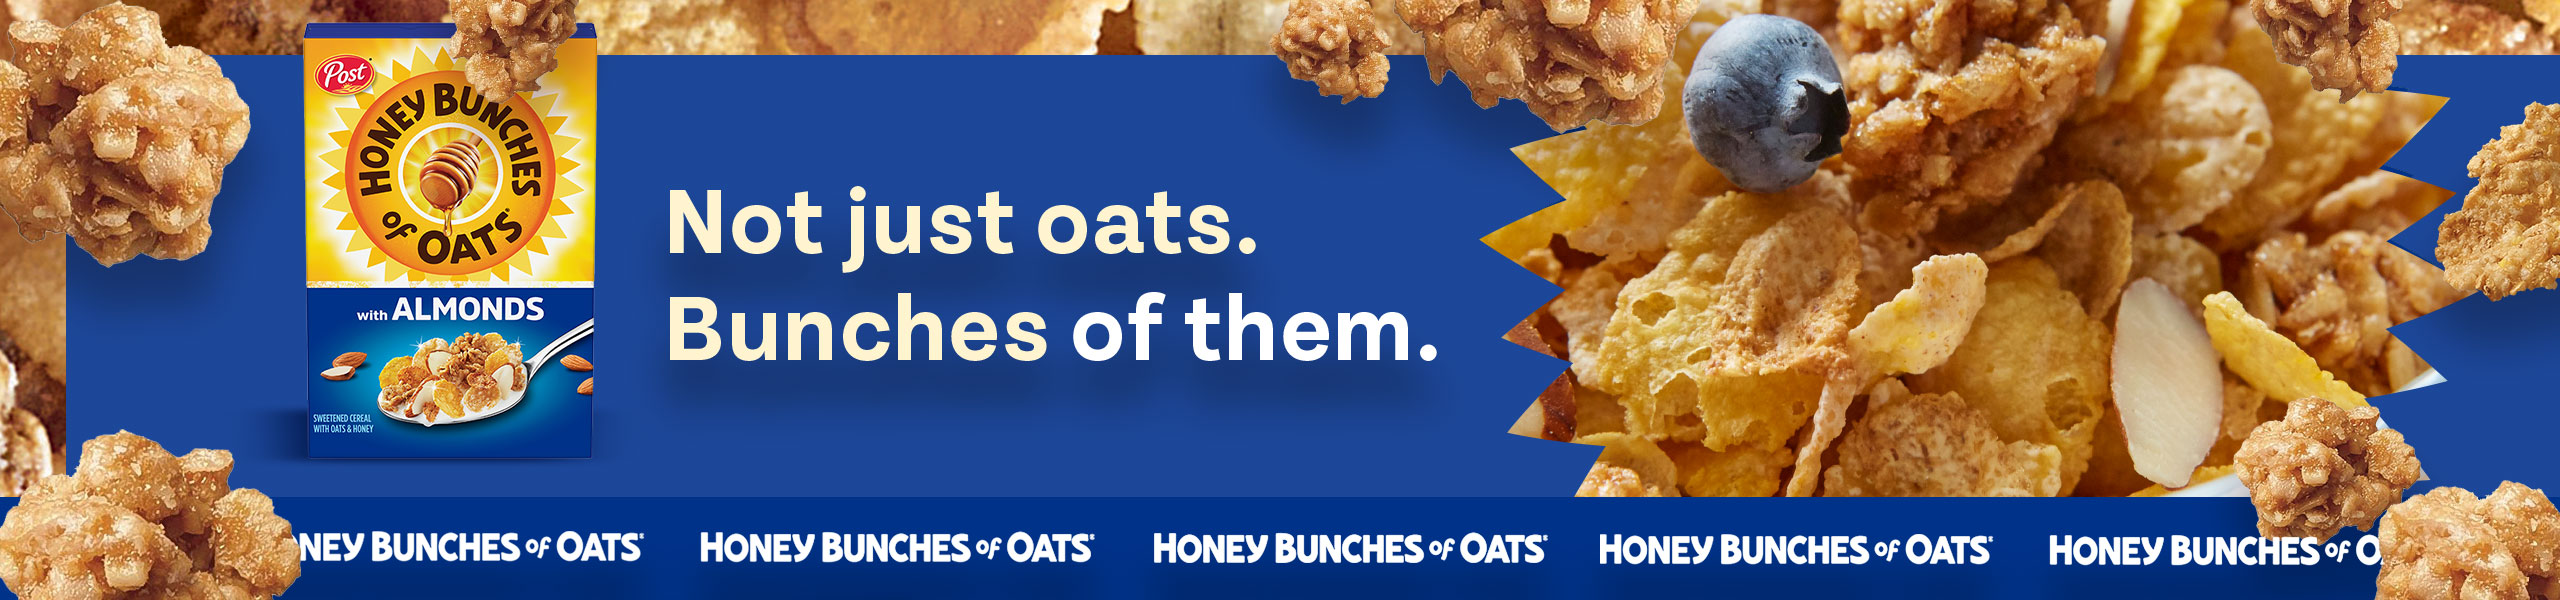 Not just oats. Bunches of them.